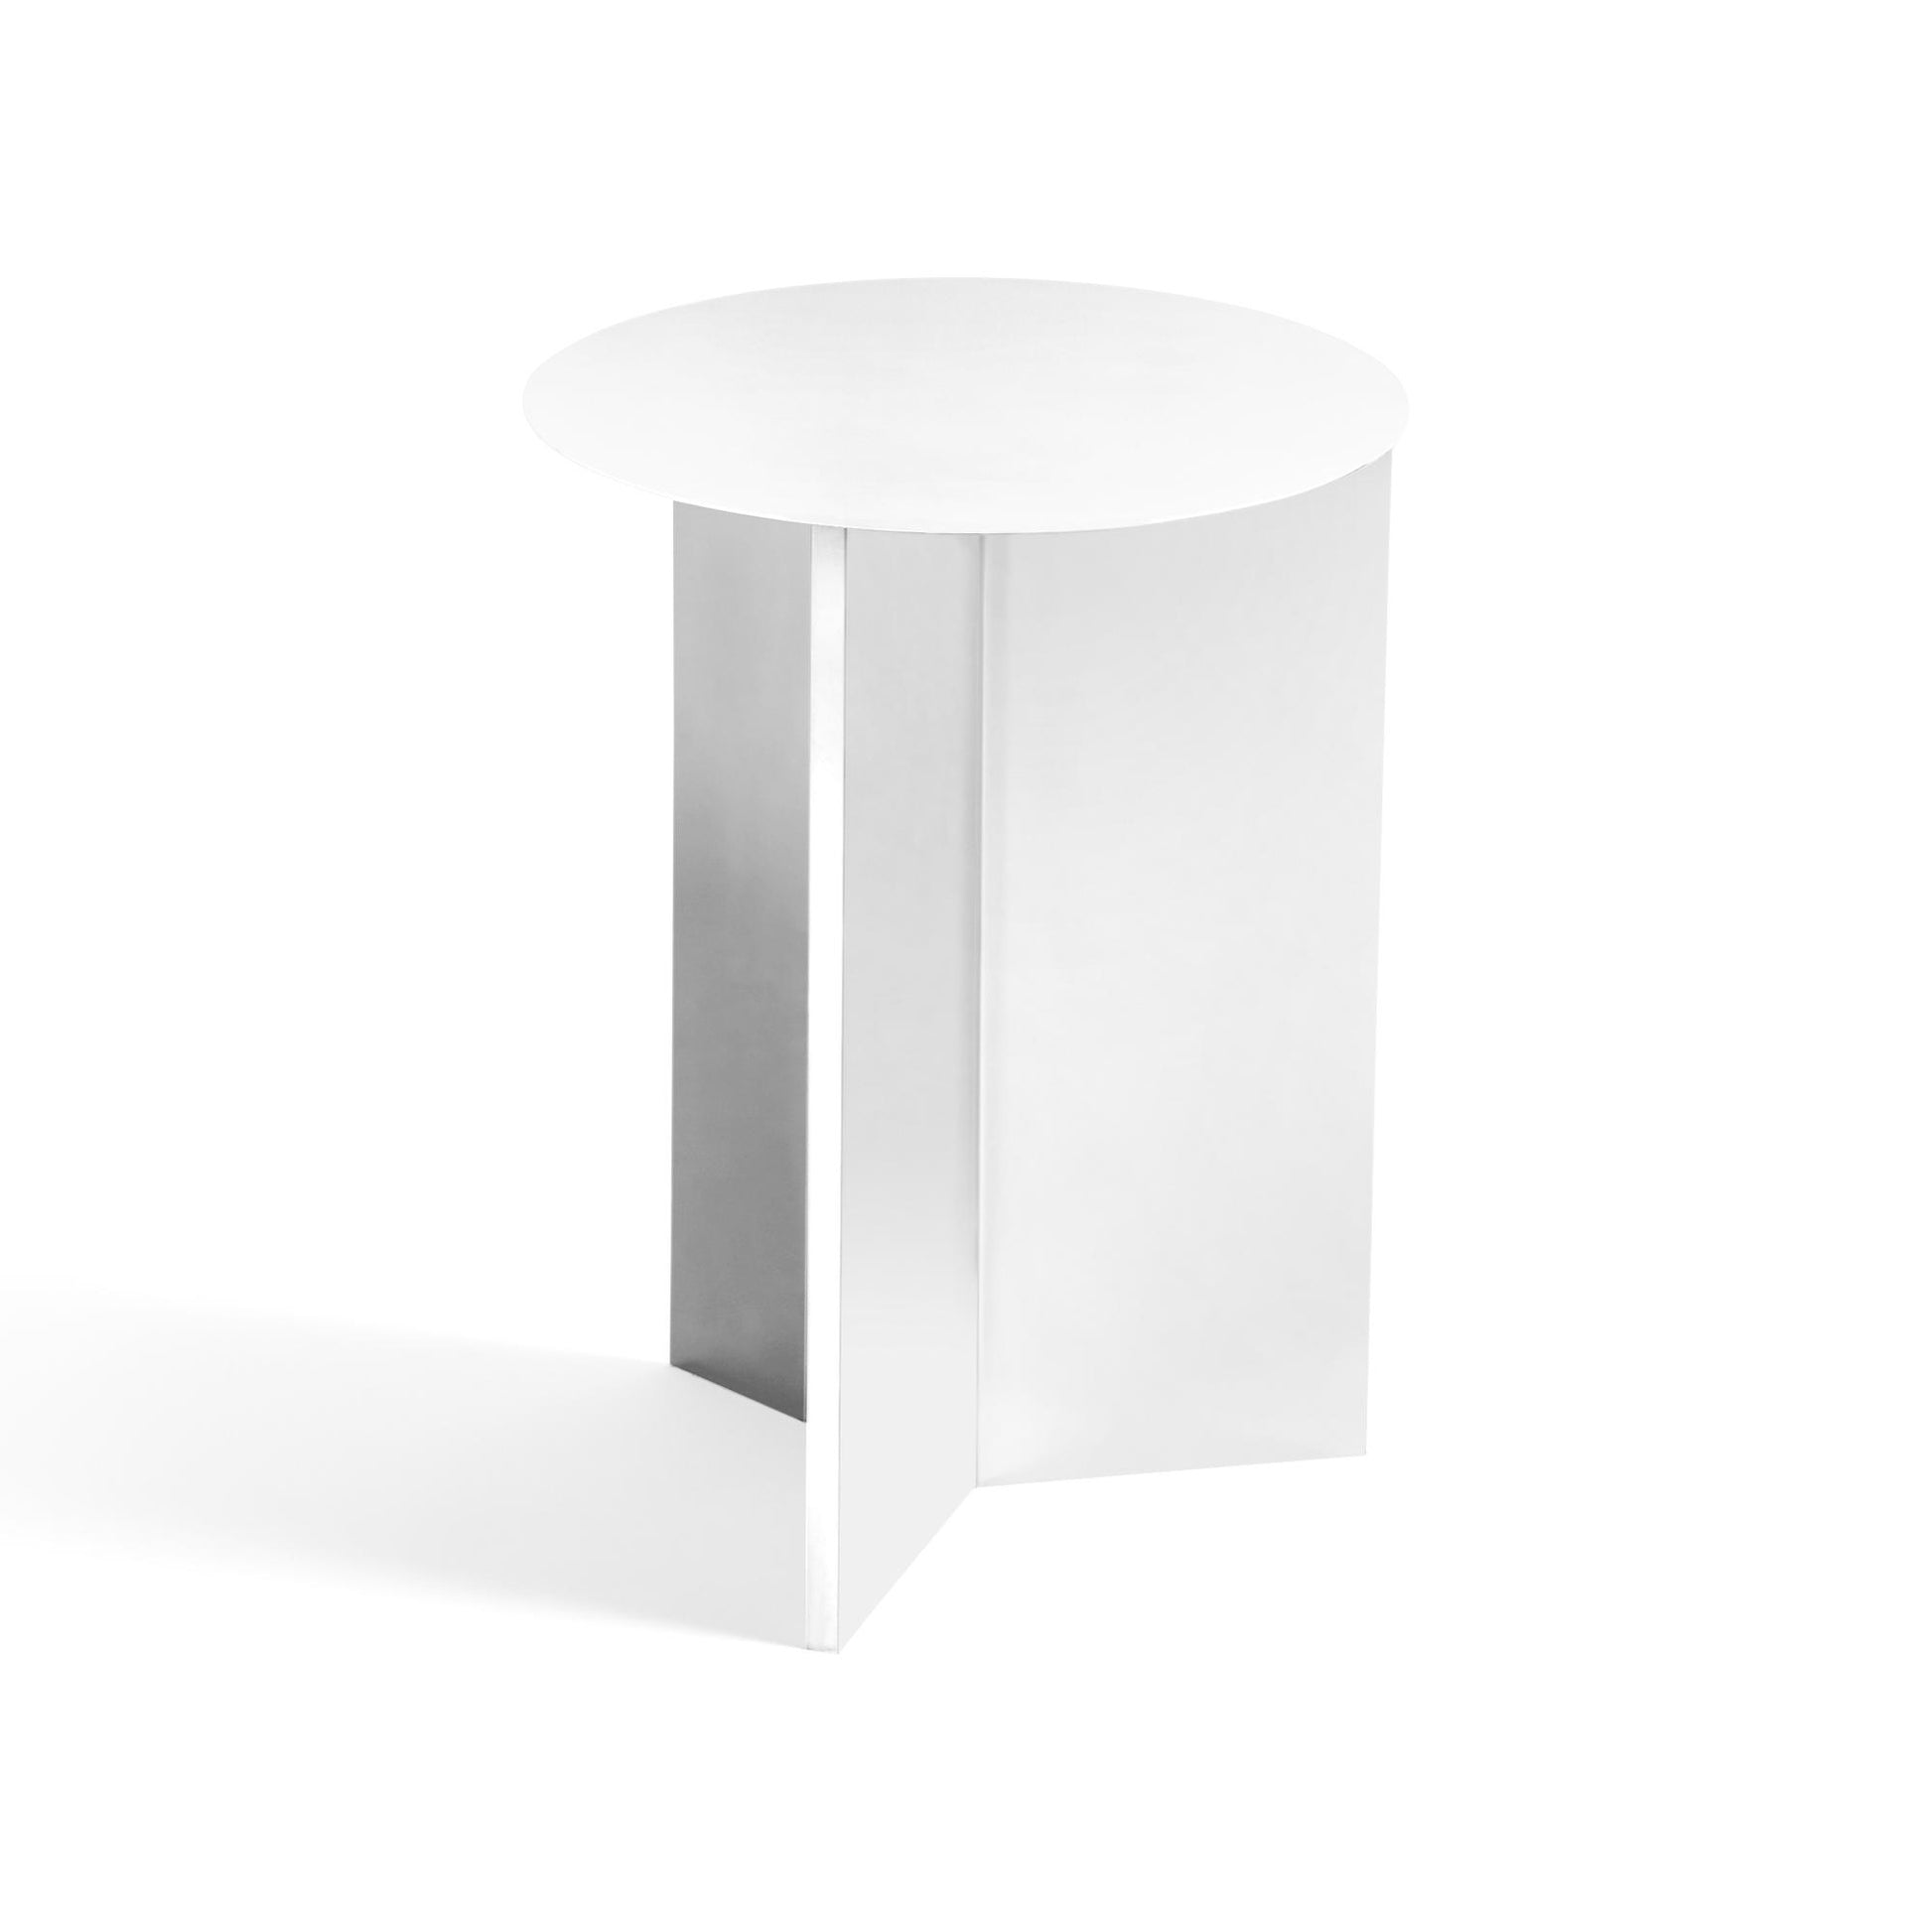 Slit Coffee Table Round Ø35 by HAY #White